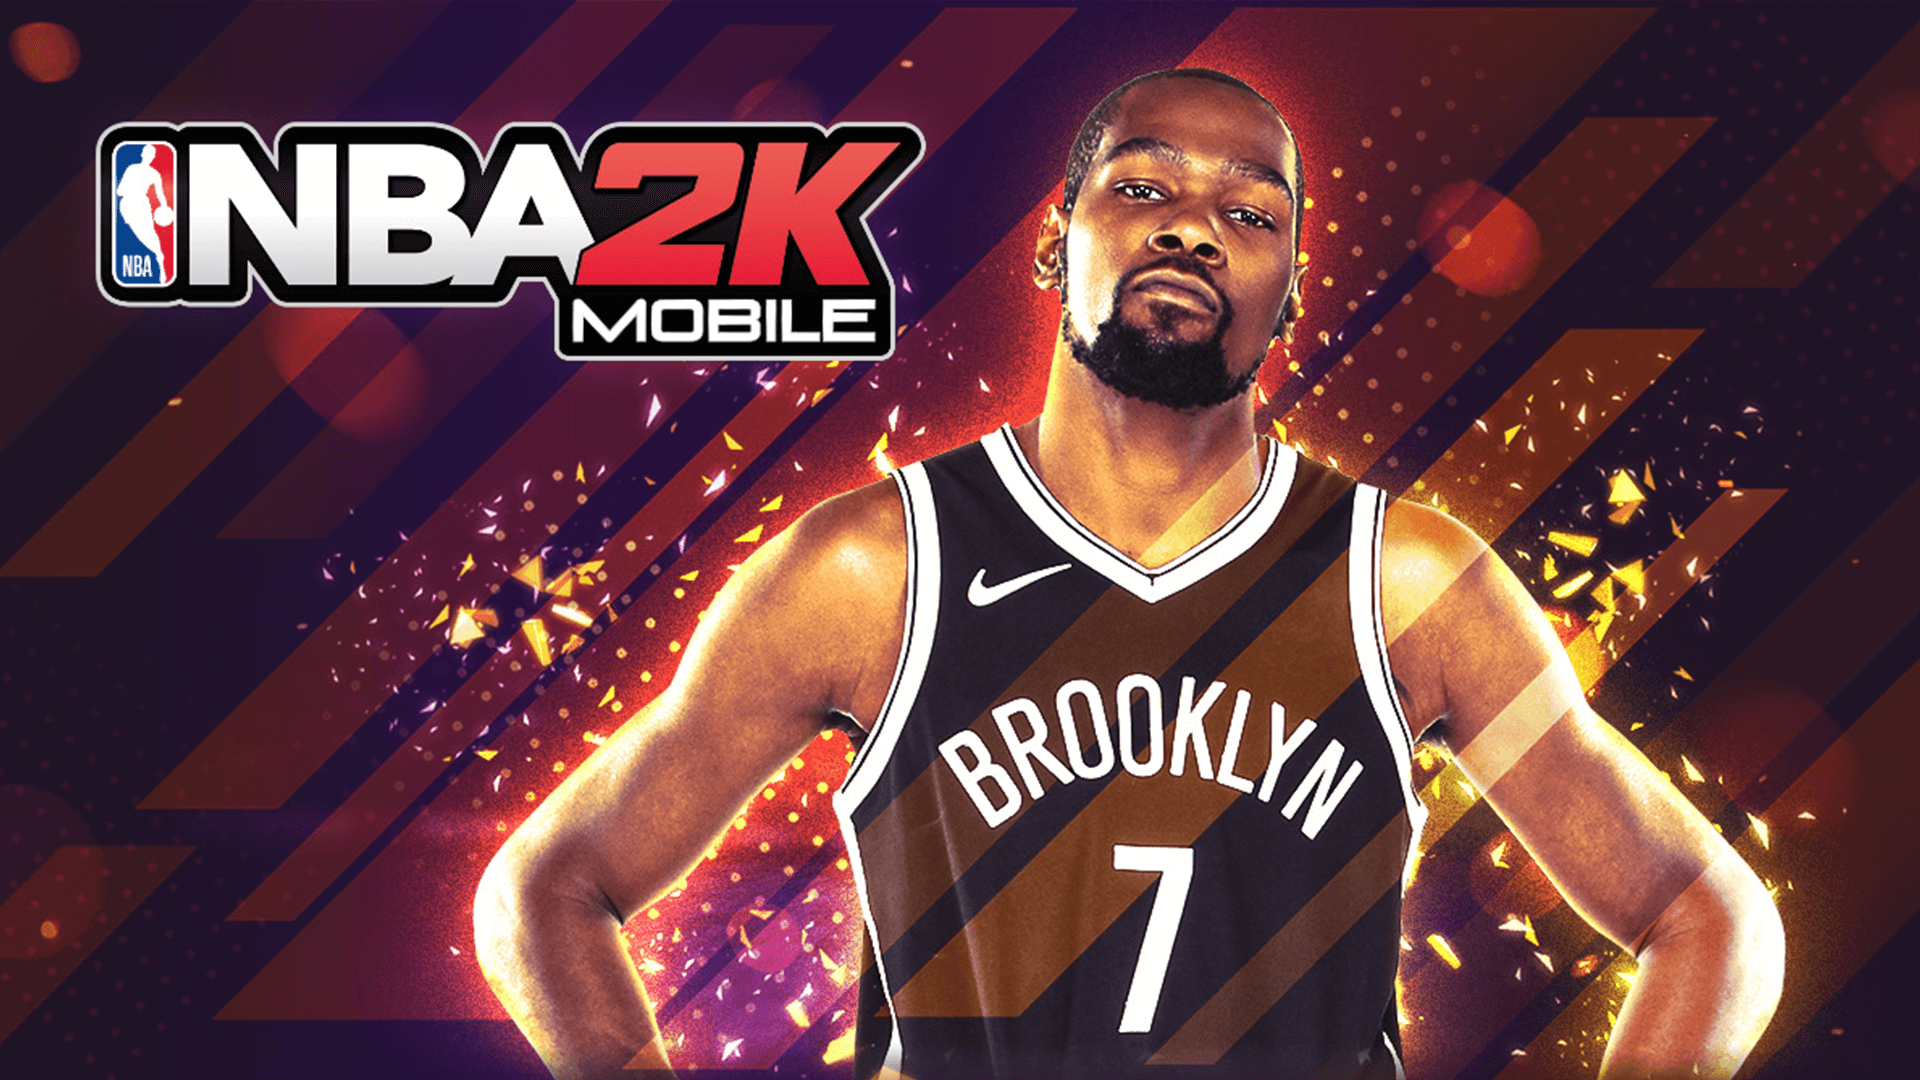 NBA 2K Mobile Partners With Kevin Durant